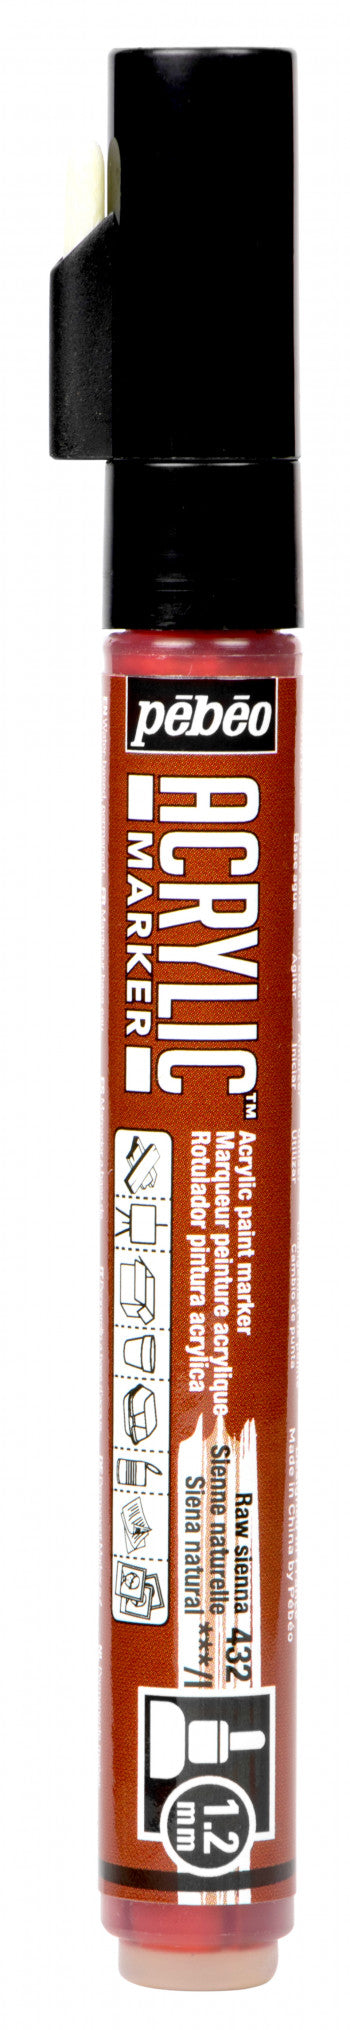 Acrylic Marker 1.2mm Pebeo Natural Sienna